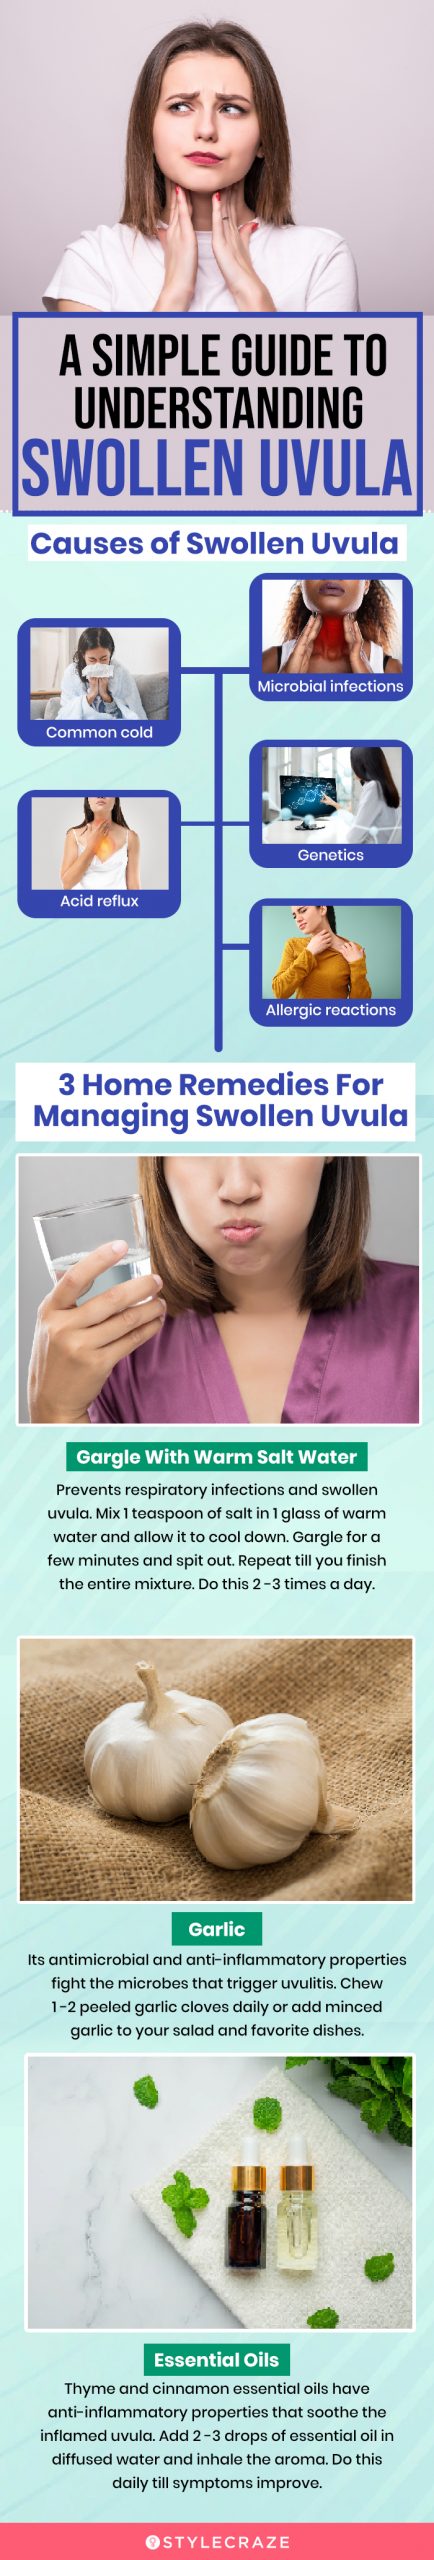 a simple guide to understanding swollen uvula (infographic)